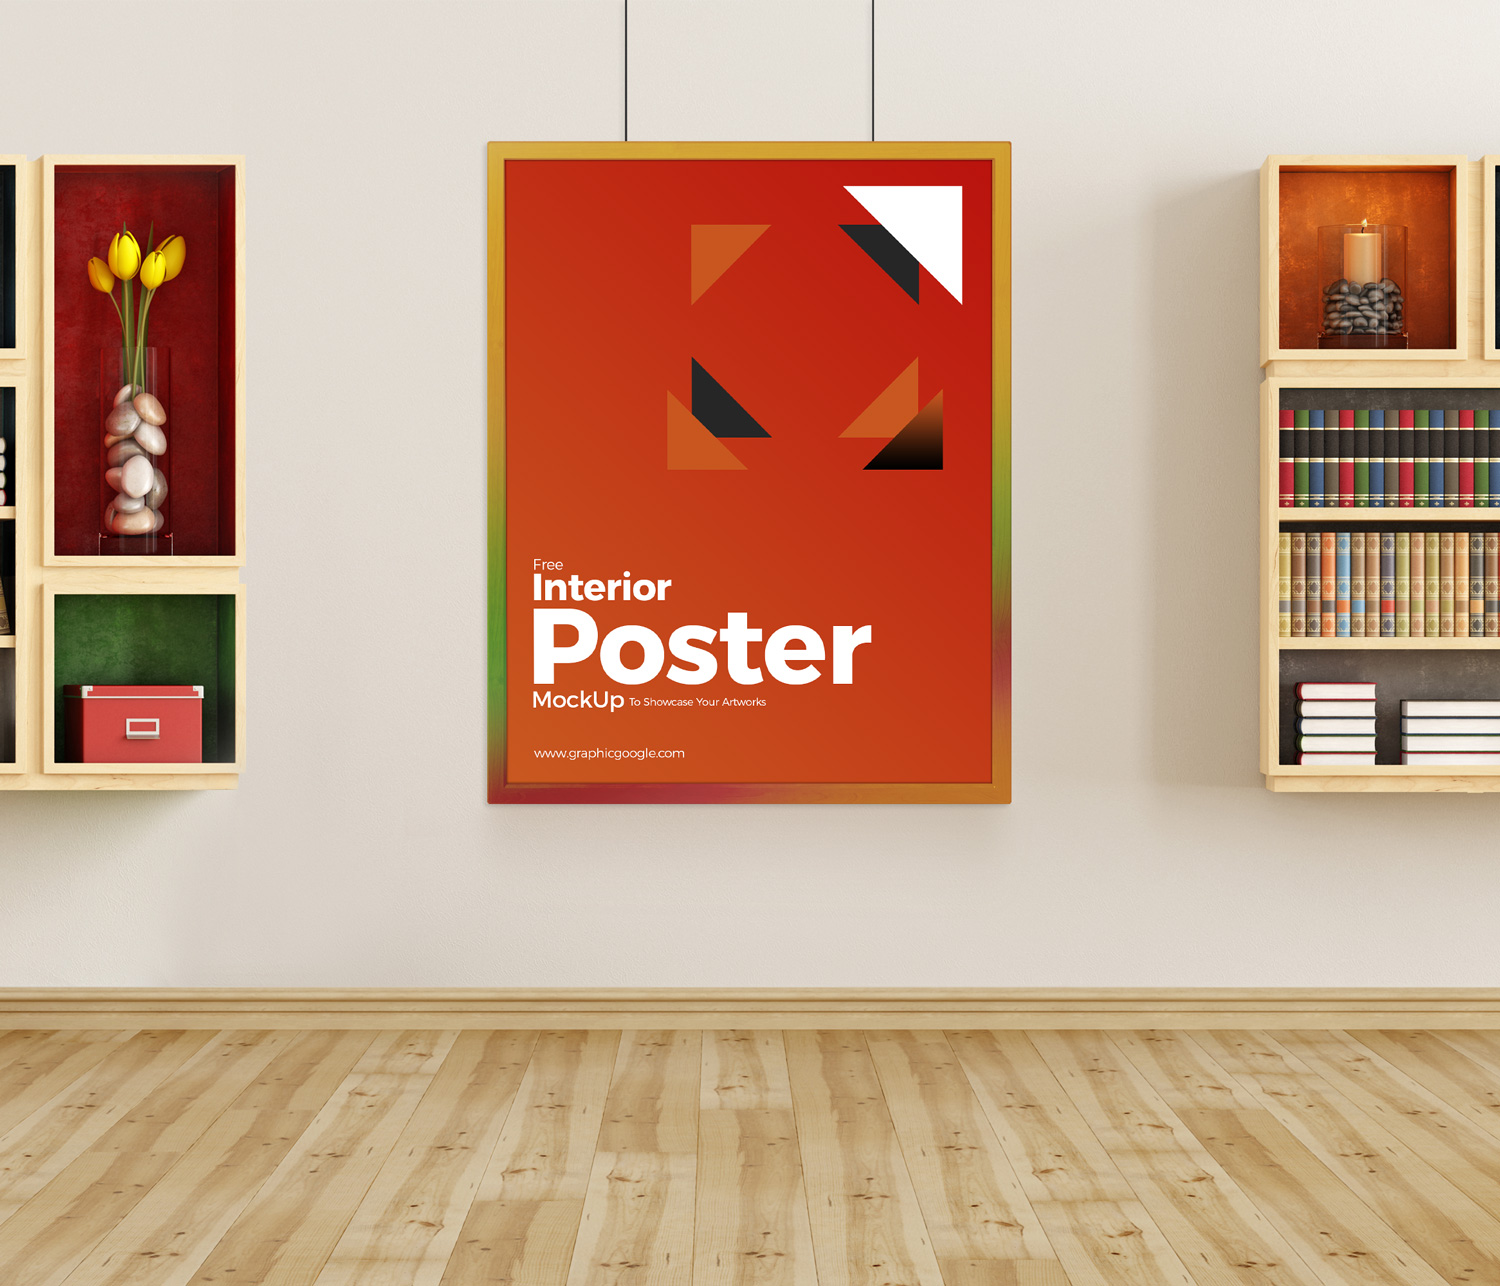 Free-Interior-Poster-Mockup-To-Showcase-Your-Artworks